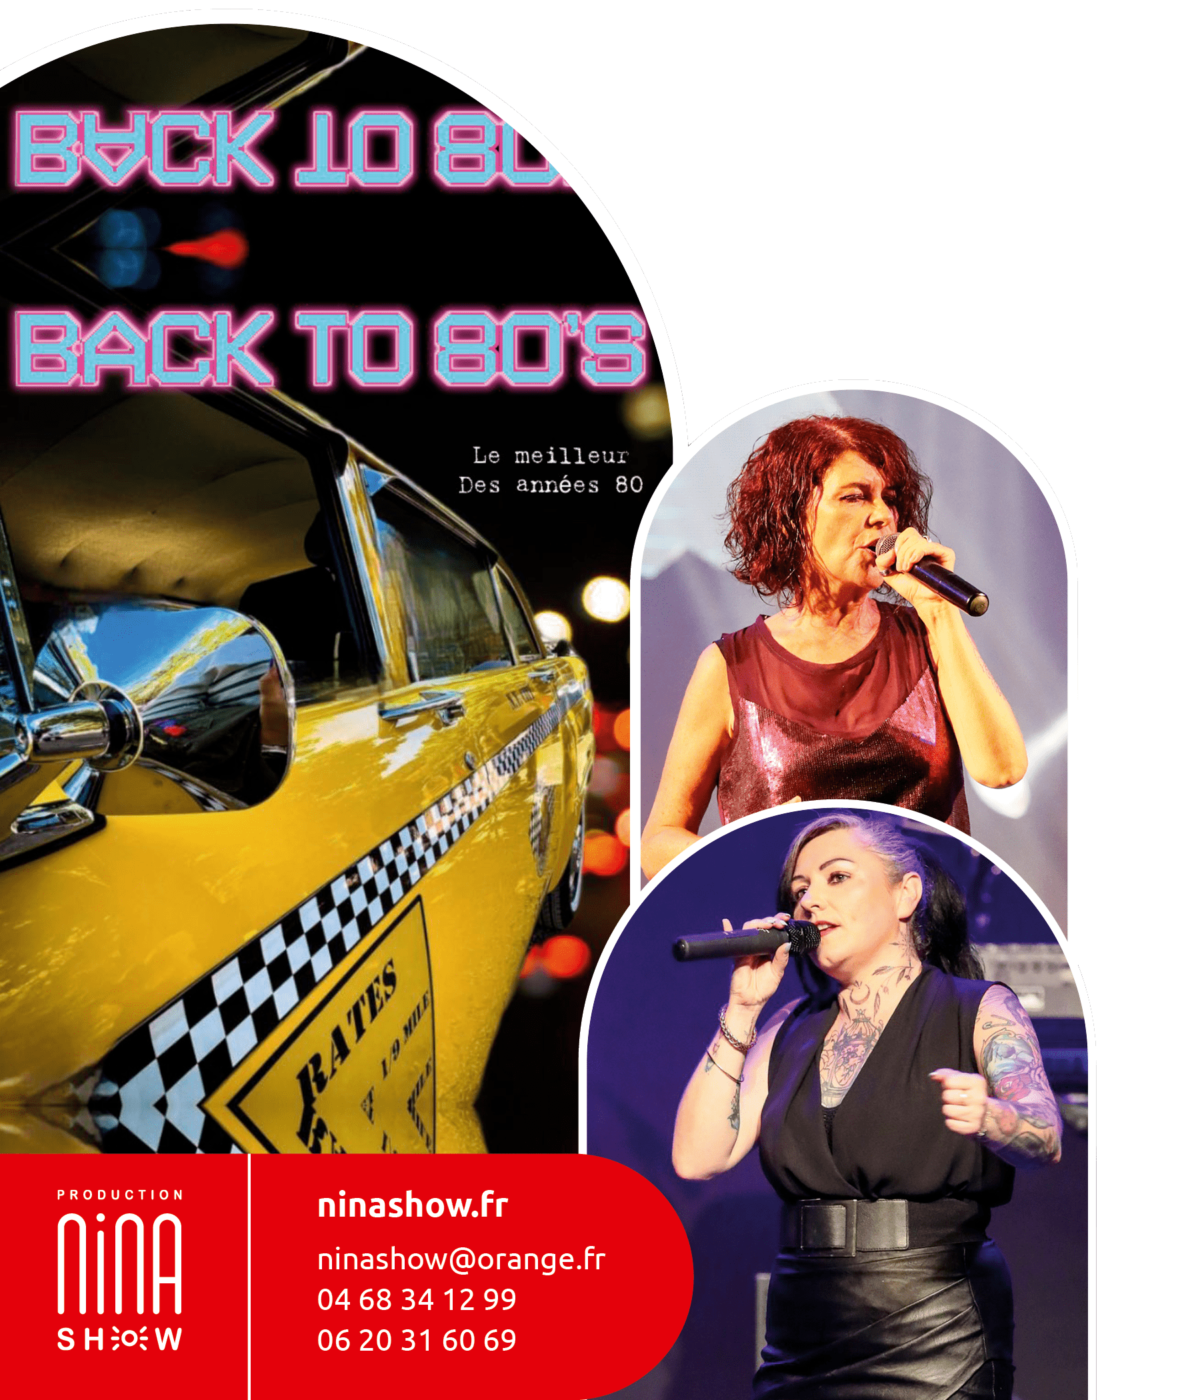 Back to 80's - Duo Années 80